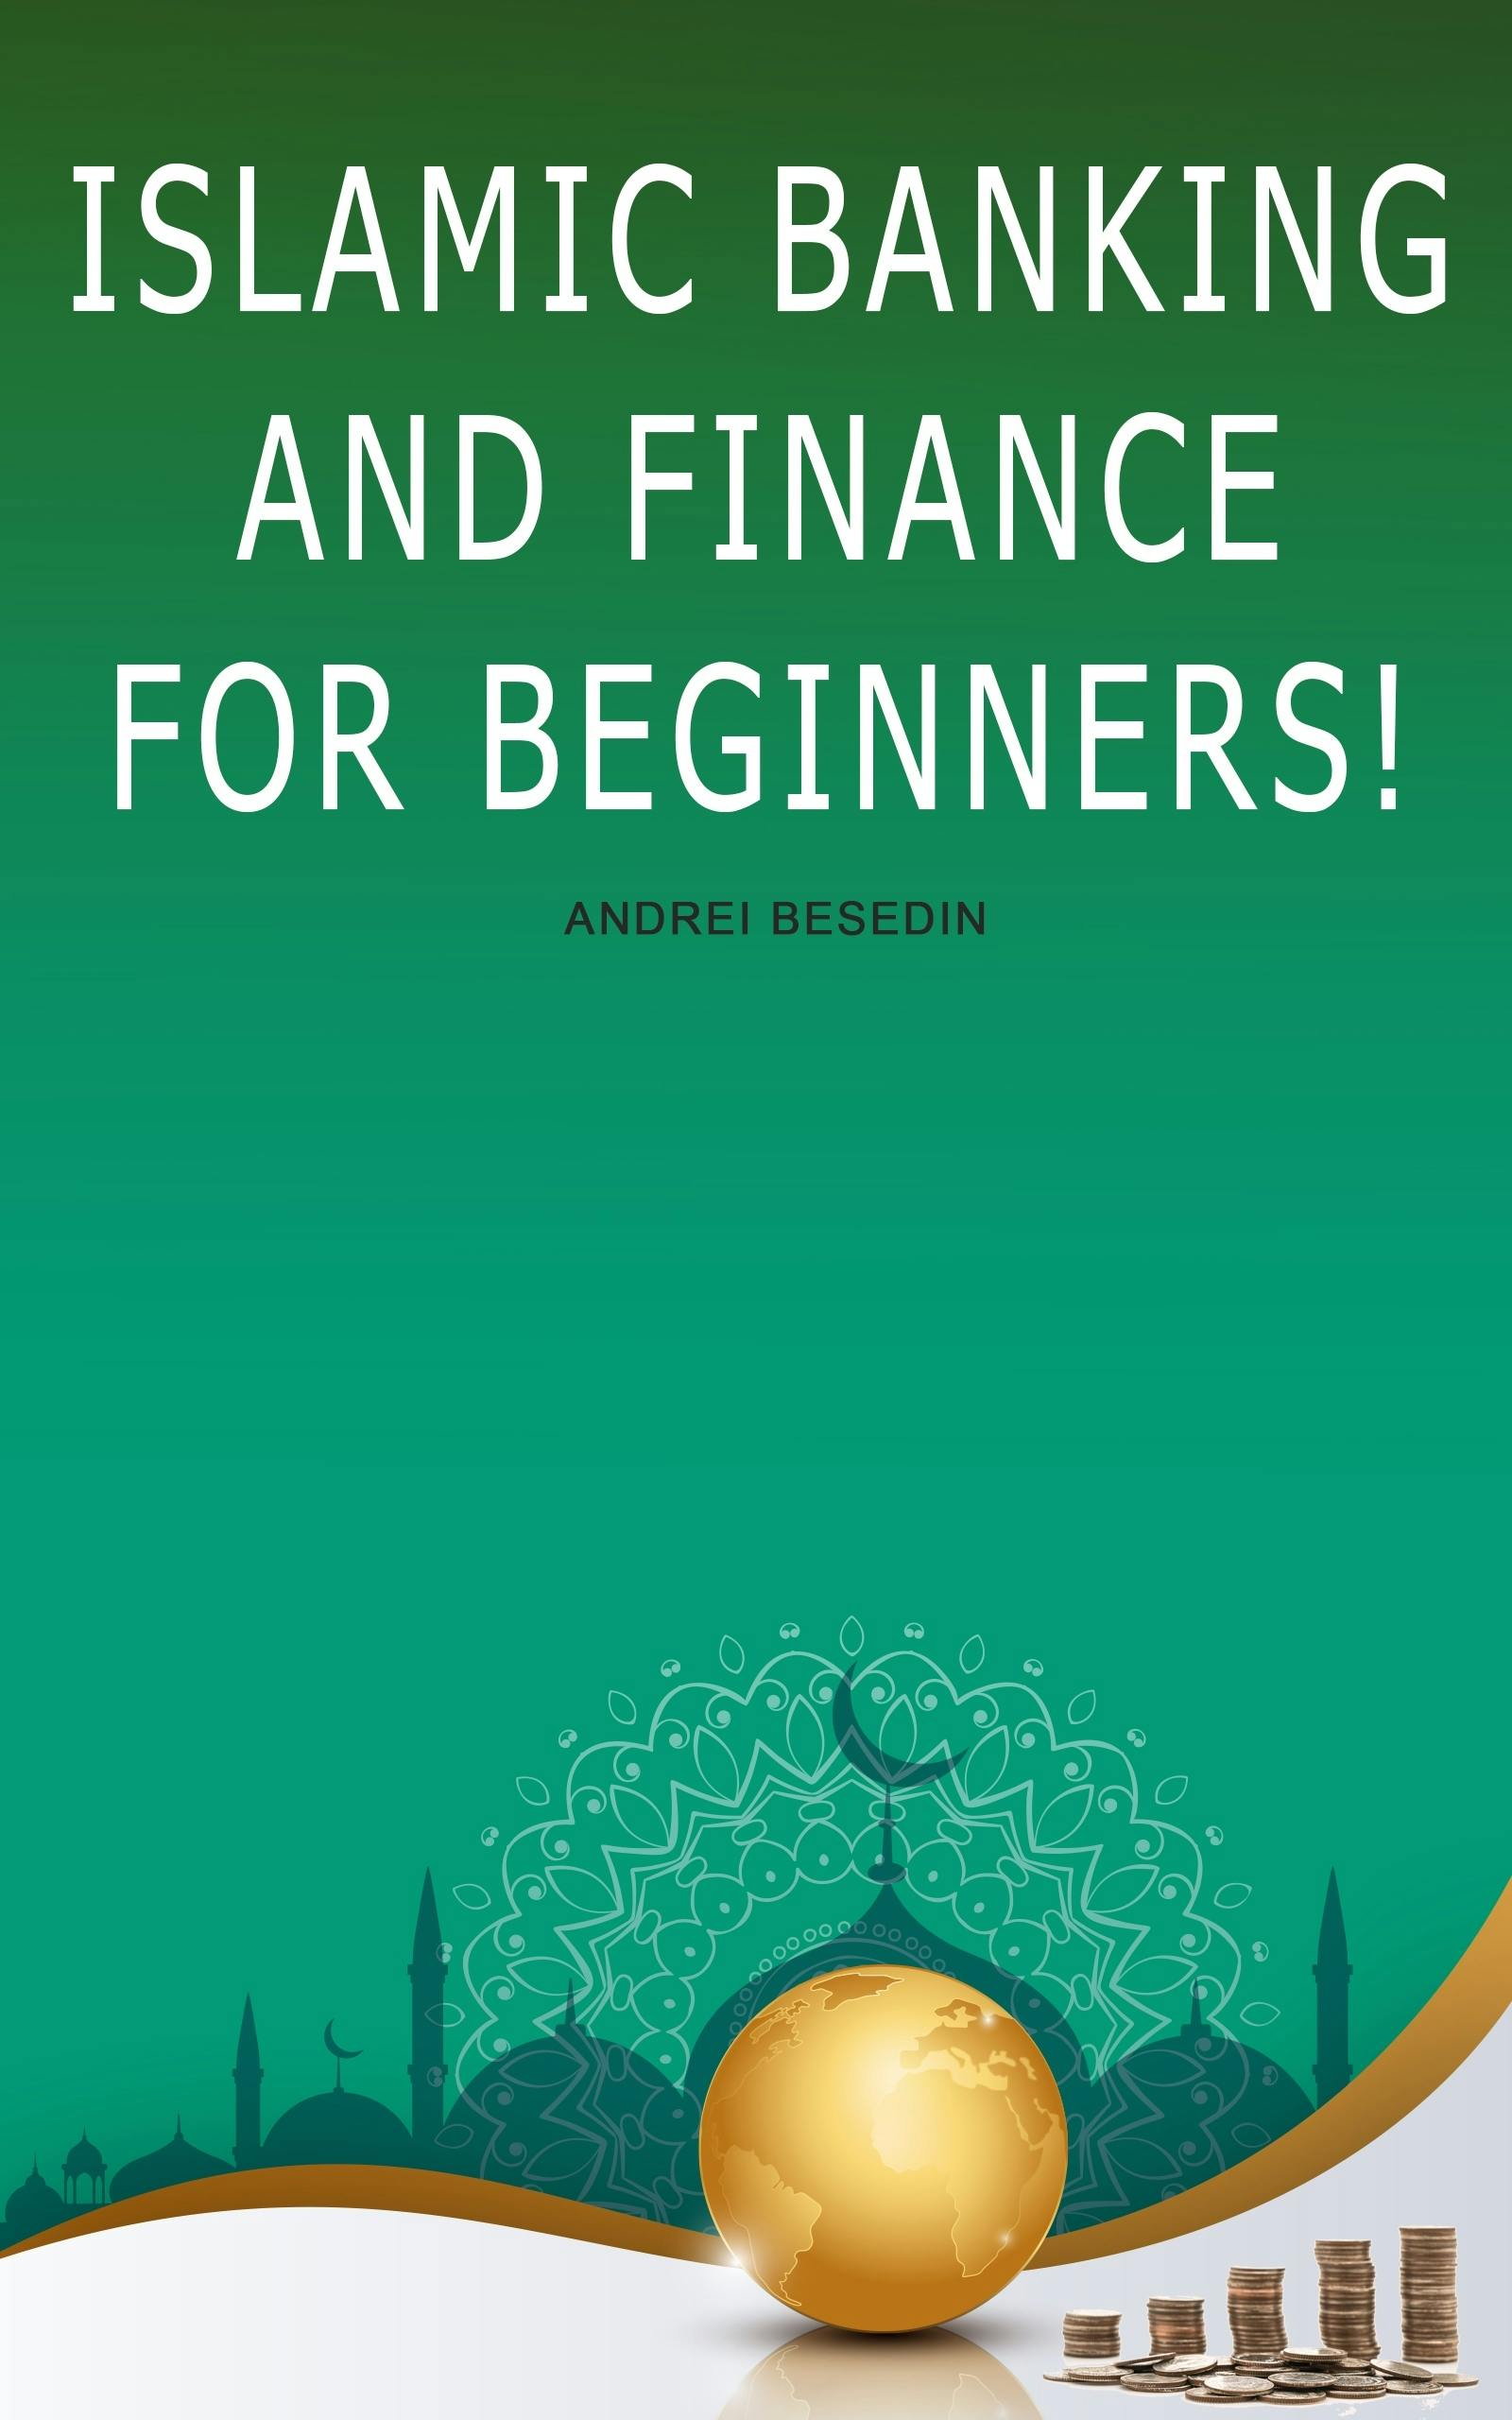 Islamic Banking And Finance for Beginners! - Andrei Besedin